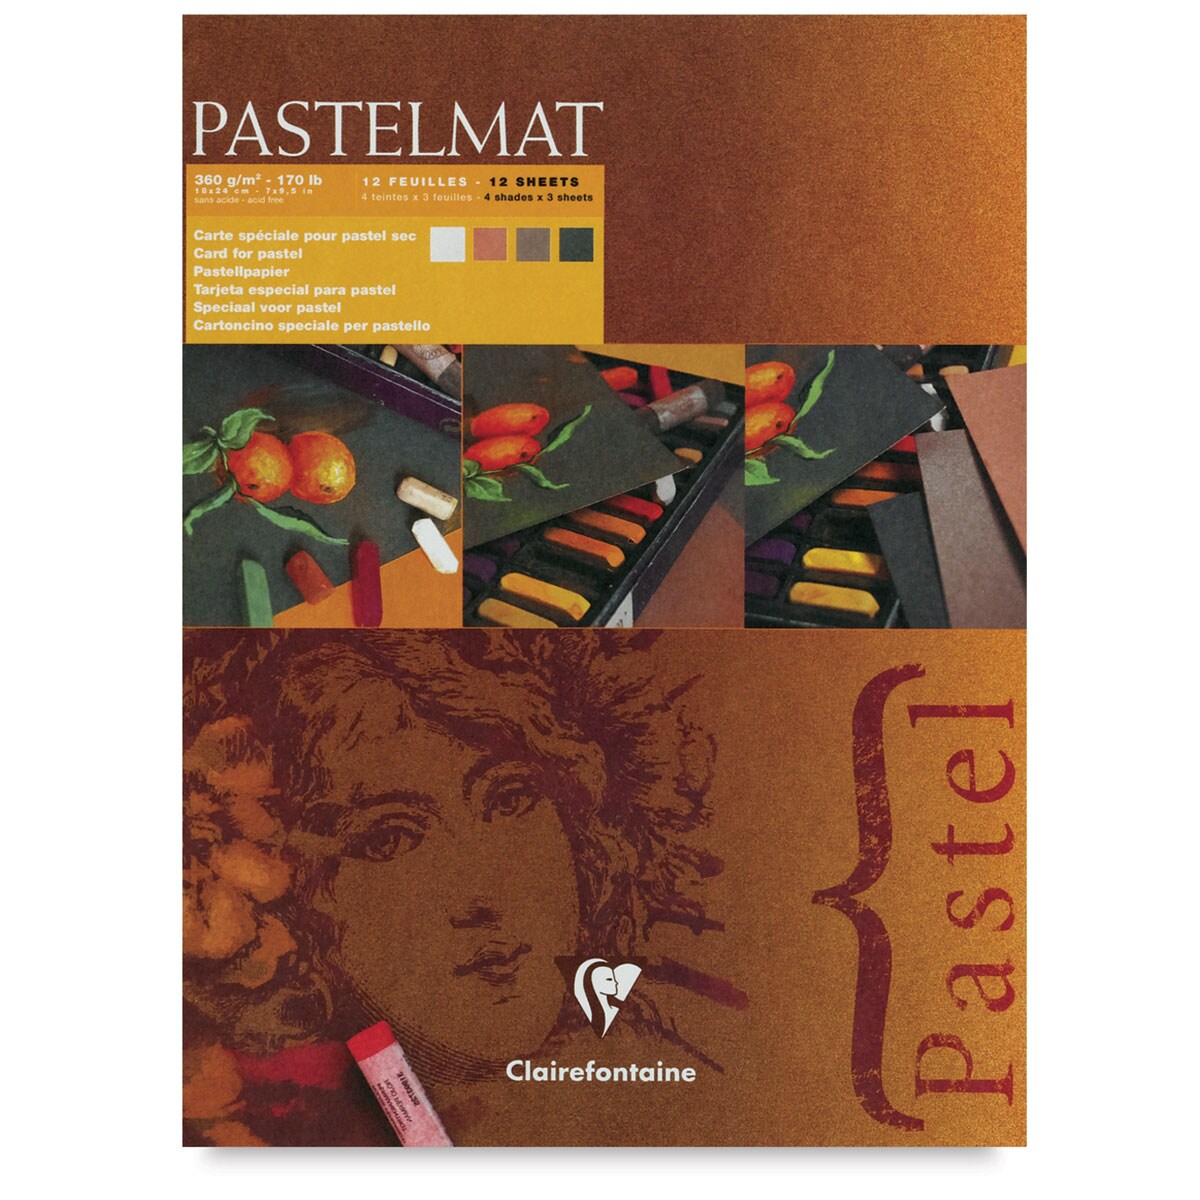 Clairefontaine Pastelmat Pastel Paper 12 Sheets 360gsm Assorted Shades